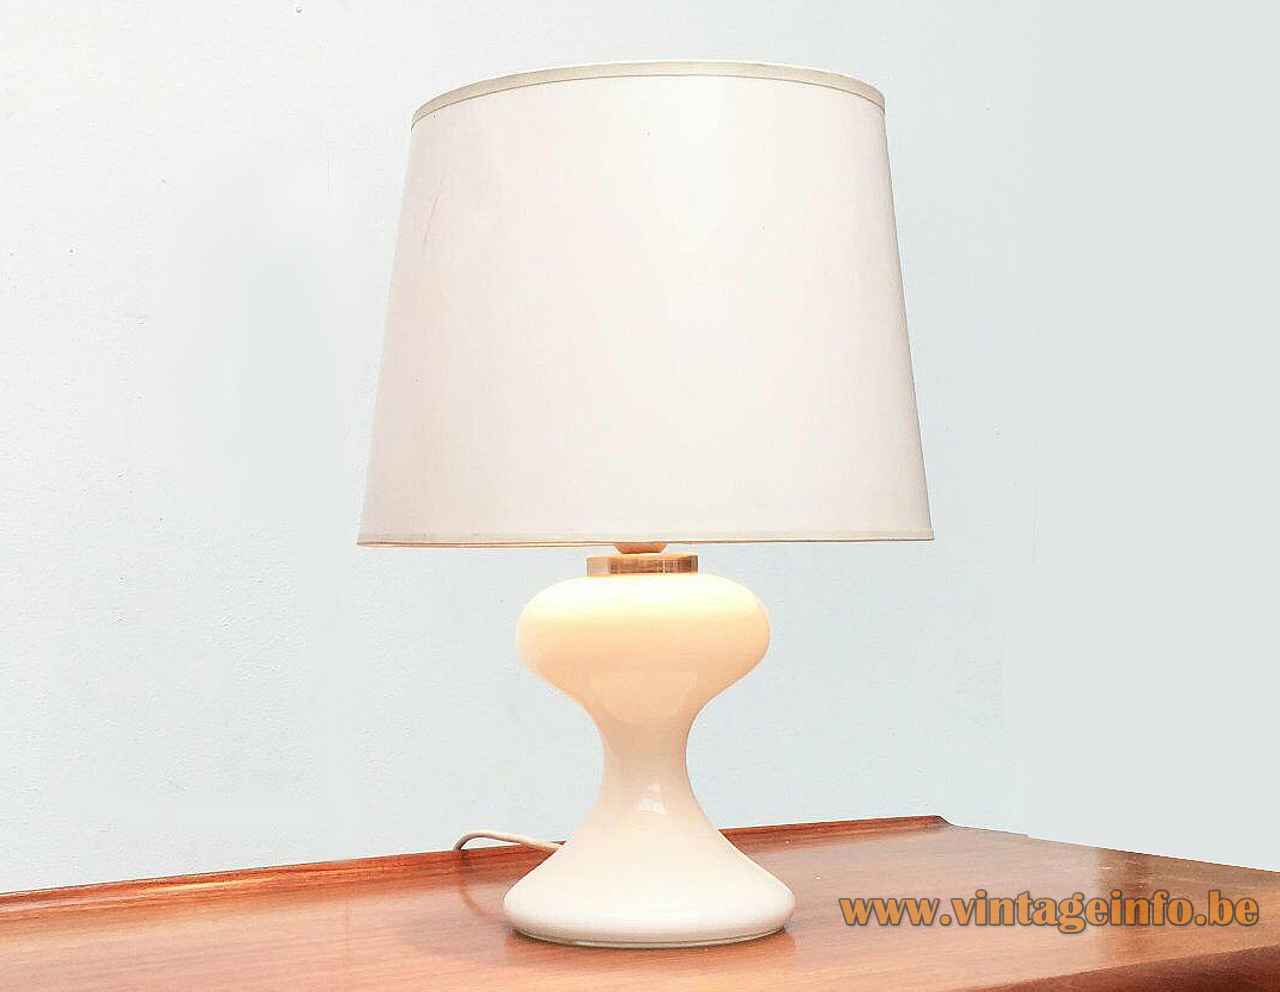 Ingo Maurer ML1 table lamp opal glass base conical fabric lampshade 1970s 1980s Design M Germany